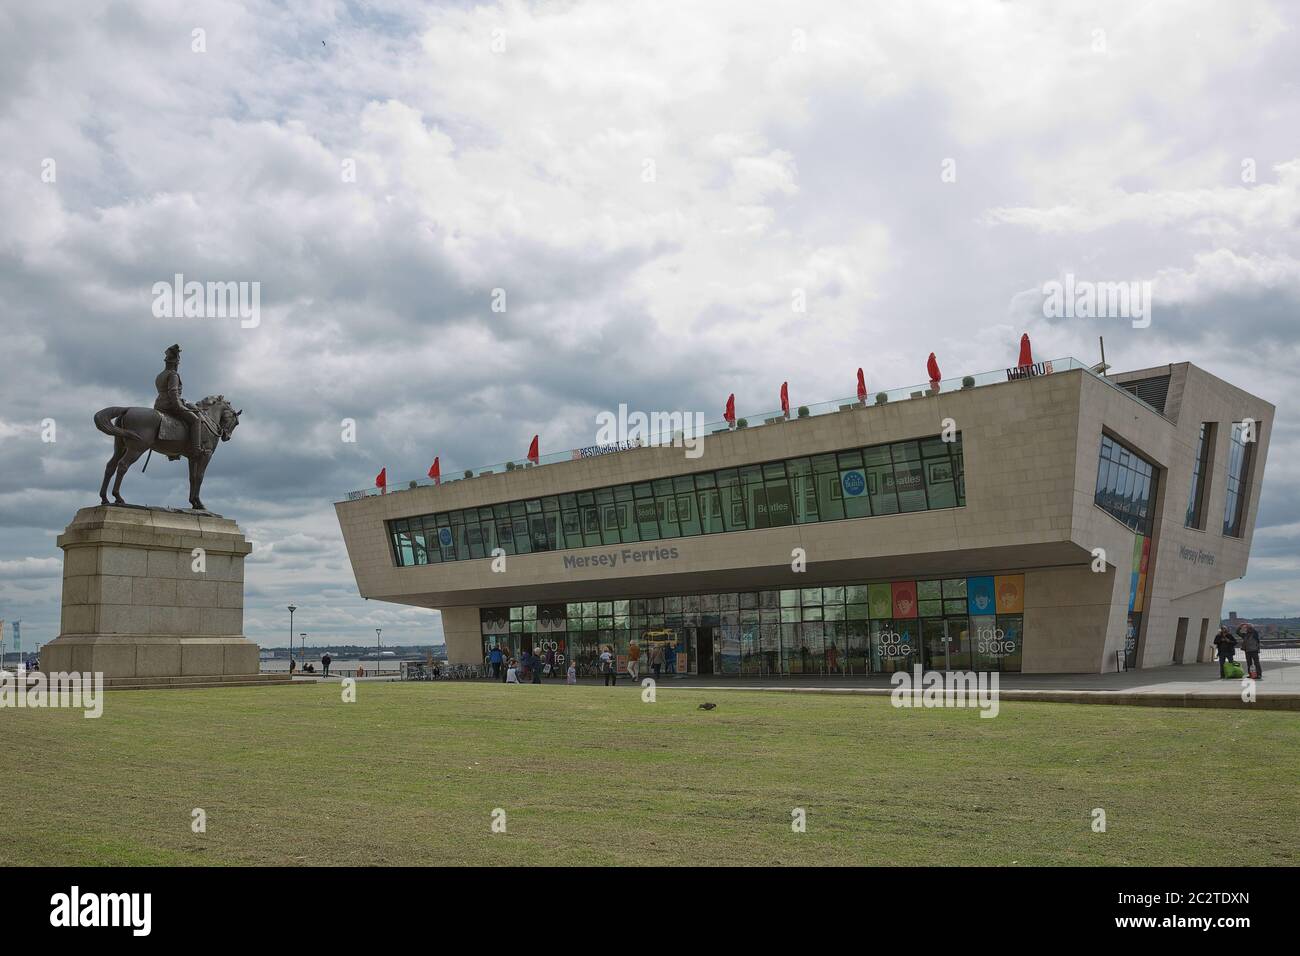 The Museum of Liverpool opened a year ago it reflects the city's global significance Stock Photo